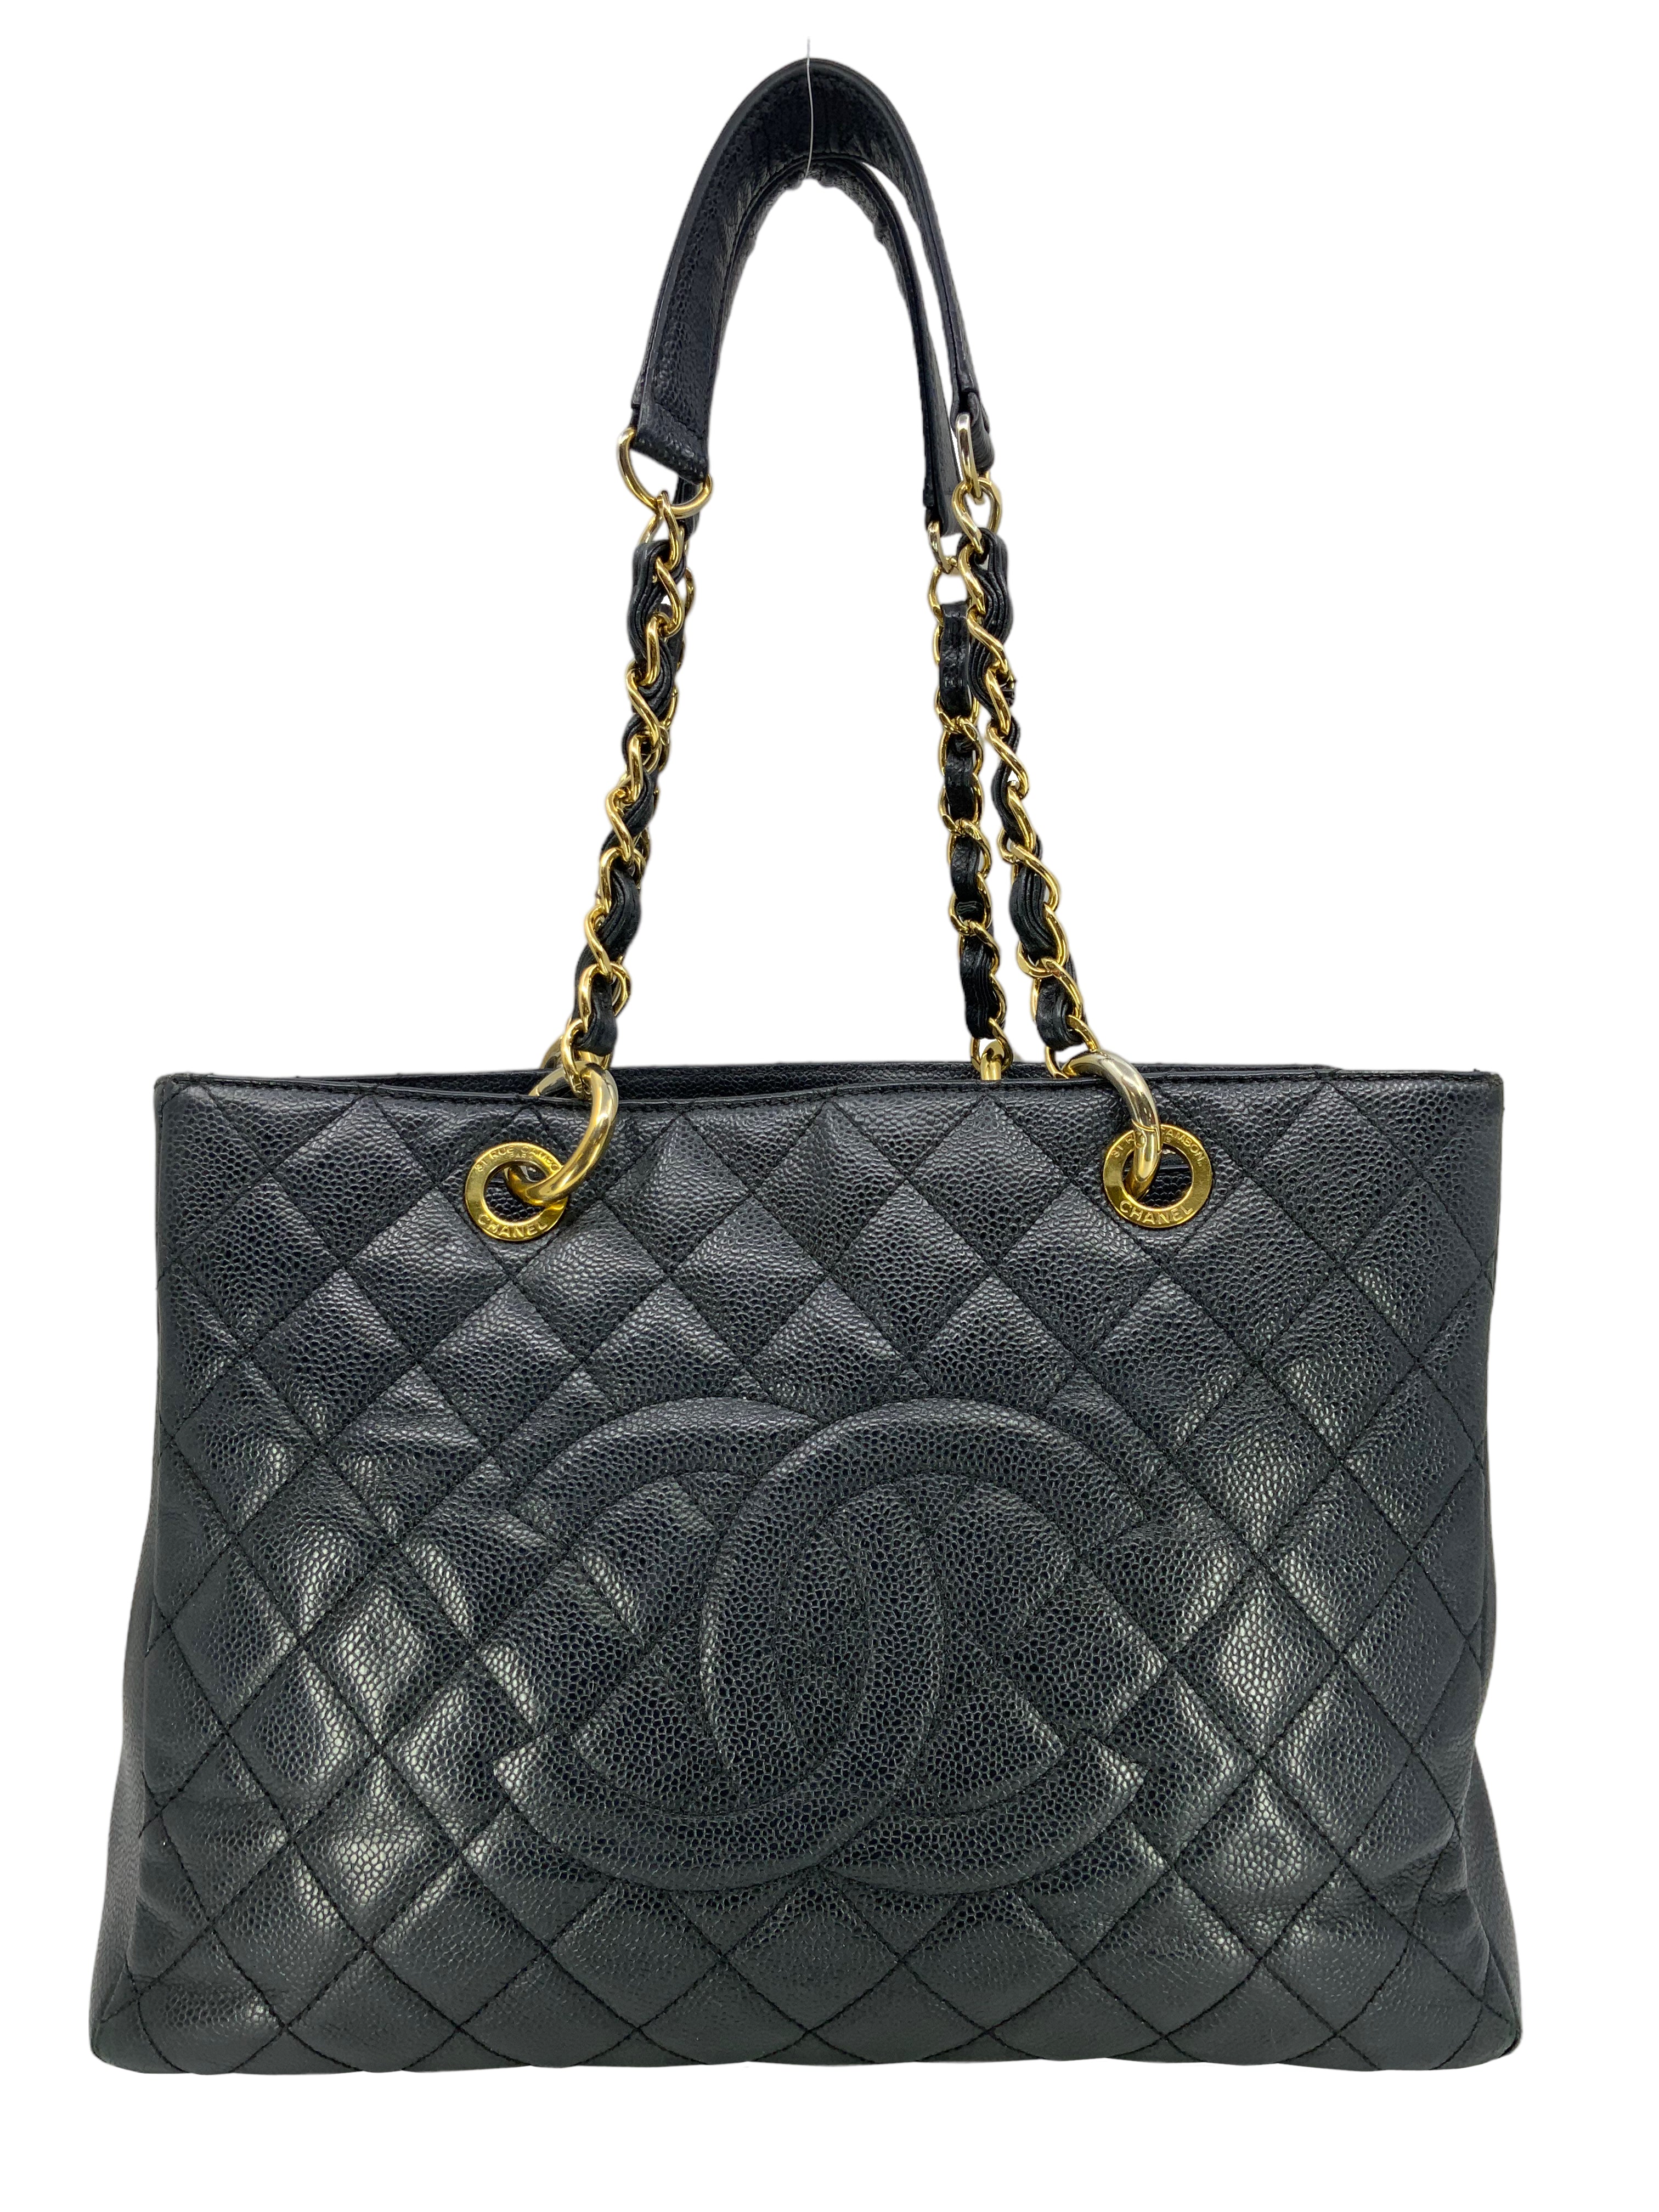 Attic House - CHANEL PST Black Color Caviar Leather Gold